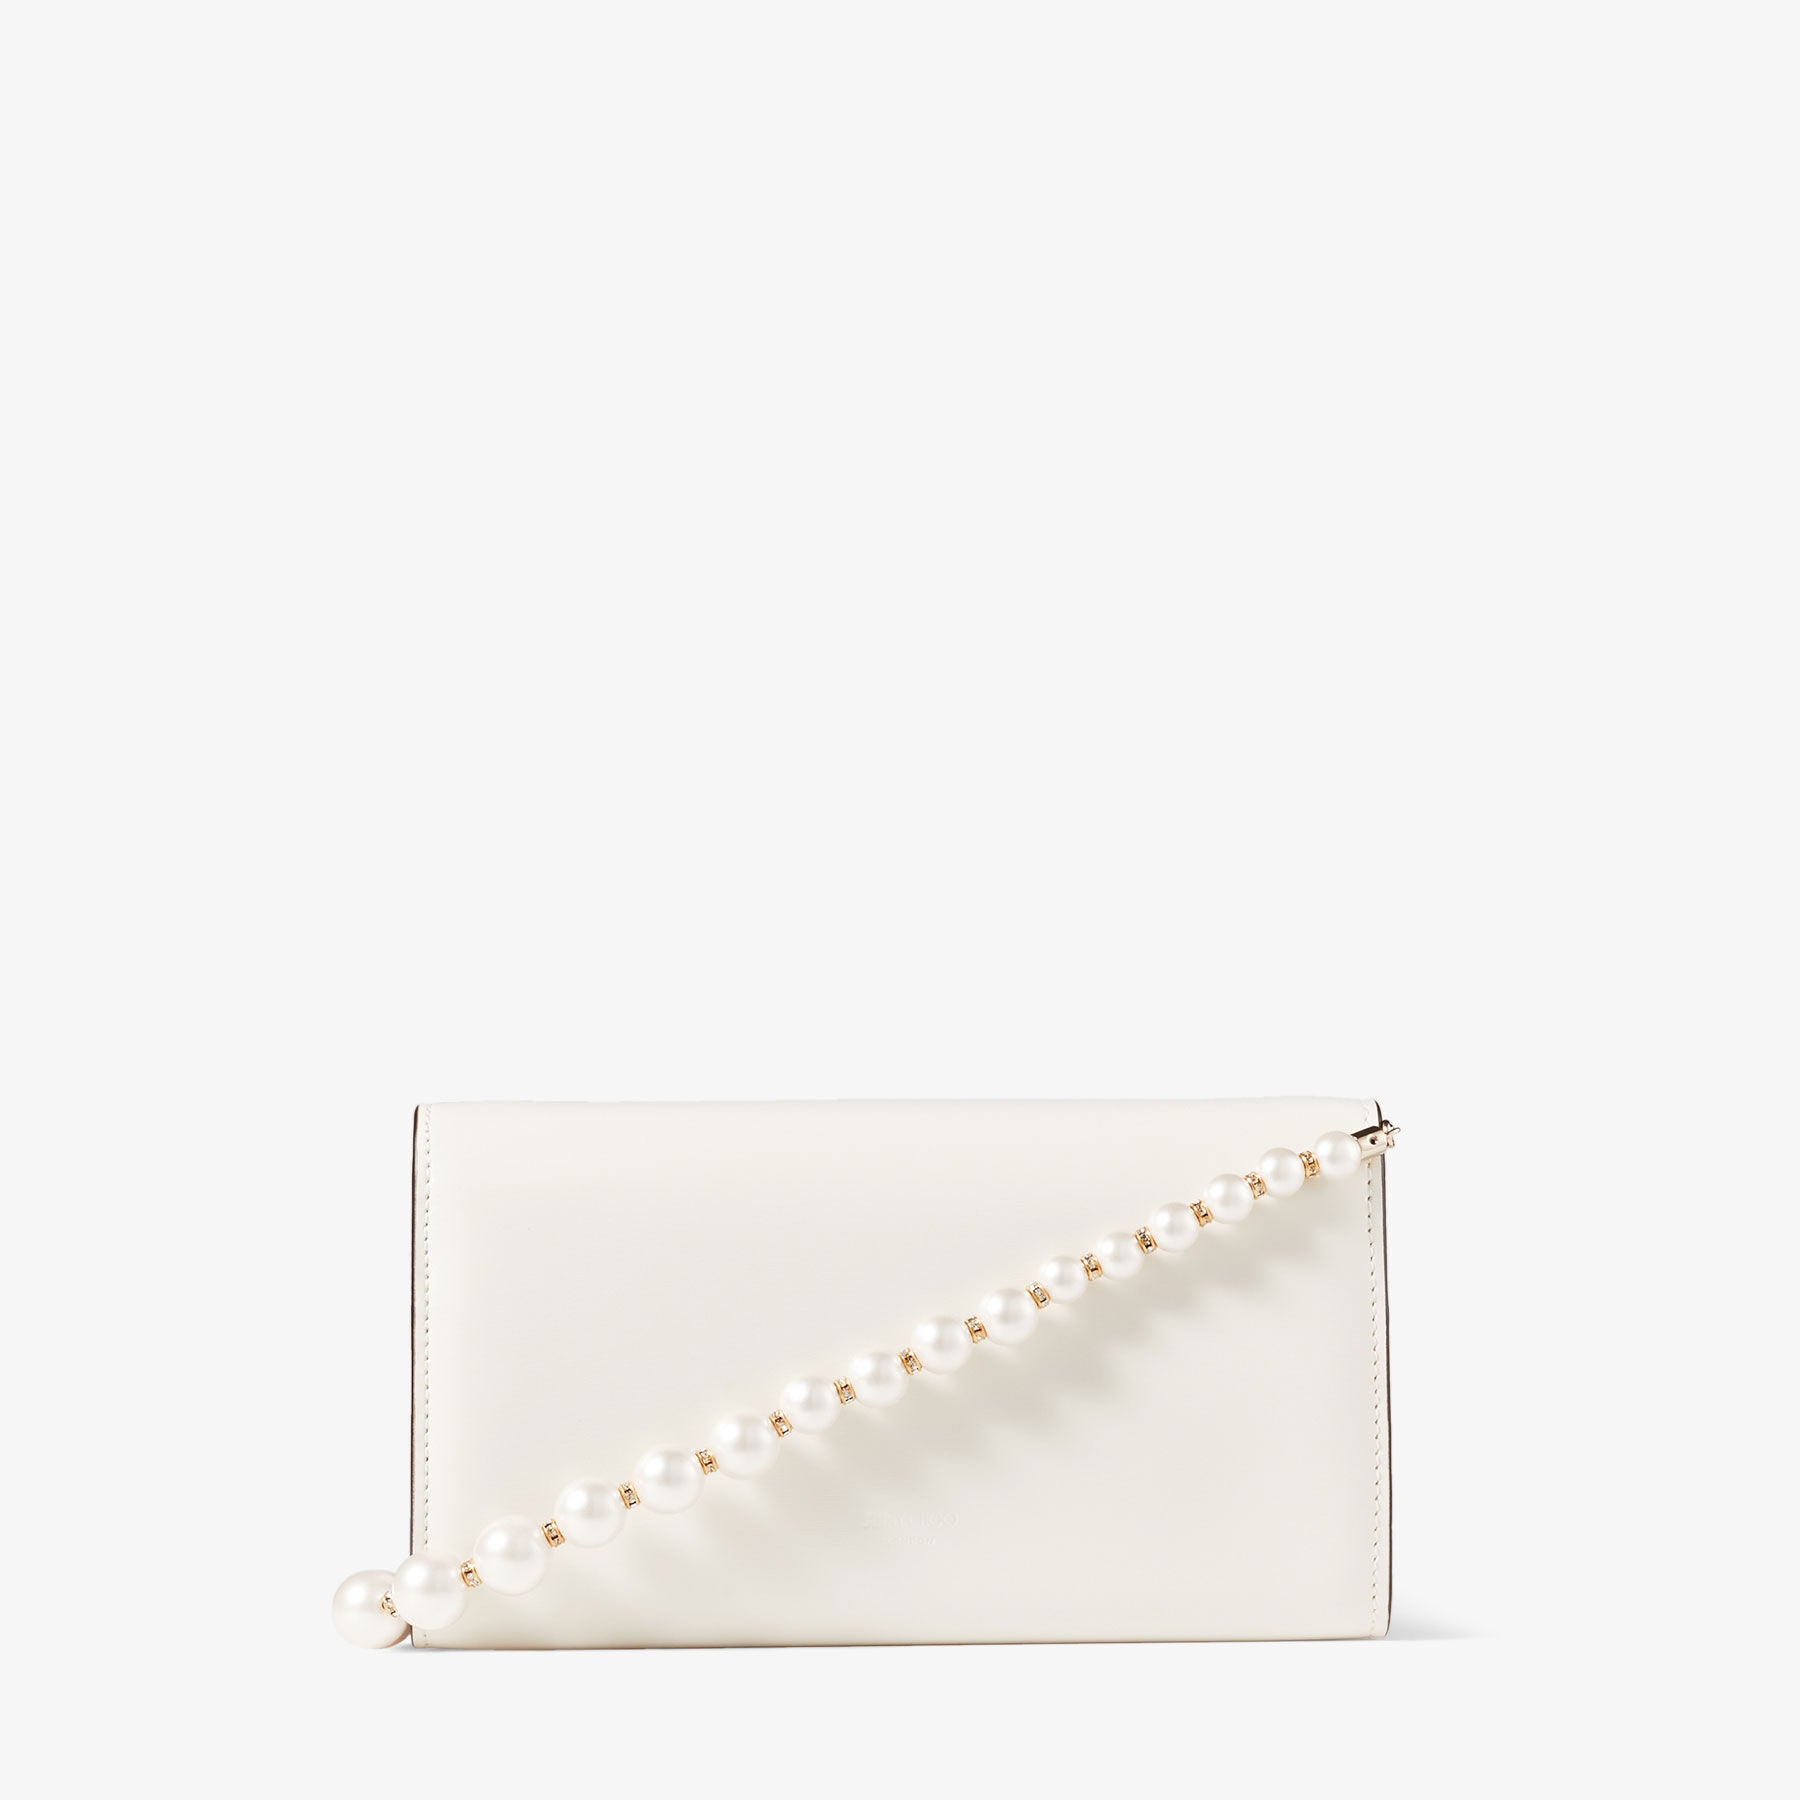 Avenue Wallet W/Chain
Latte Leather Wallet with Pearl Strap - 7